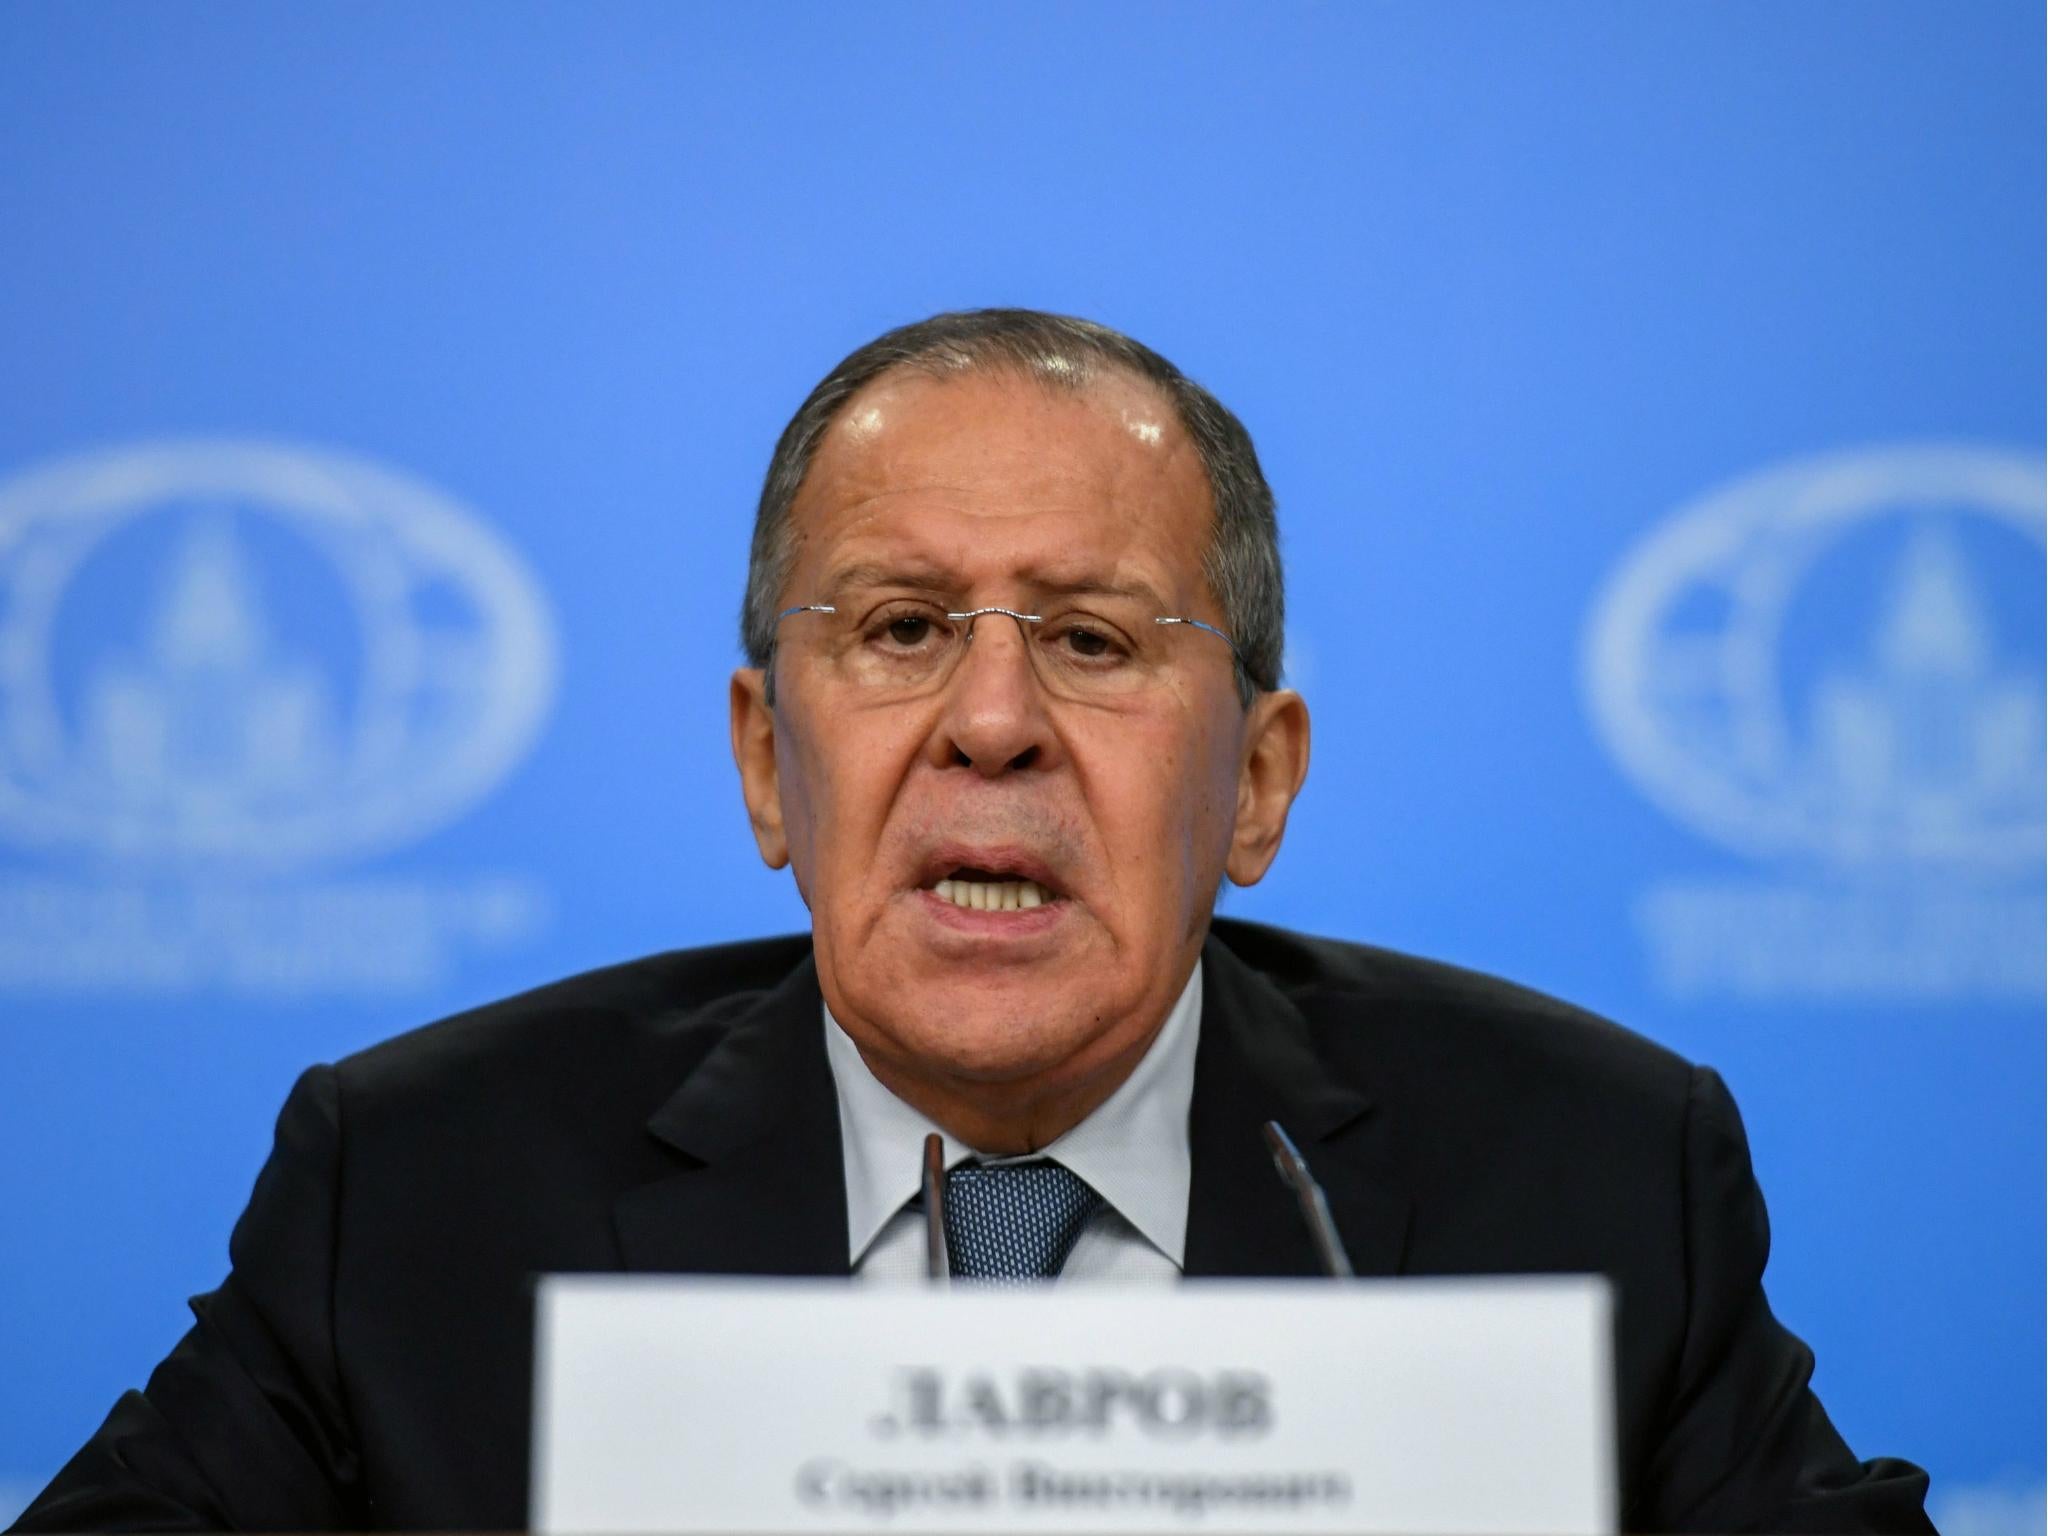 Russian Foreign Minister Sergei Lavrov gives his annual press conference in Moscow on 15 January 2018.